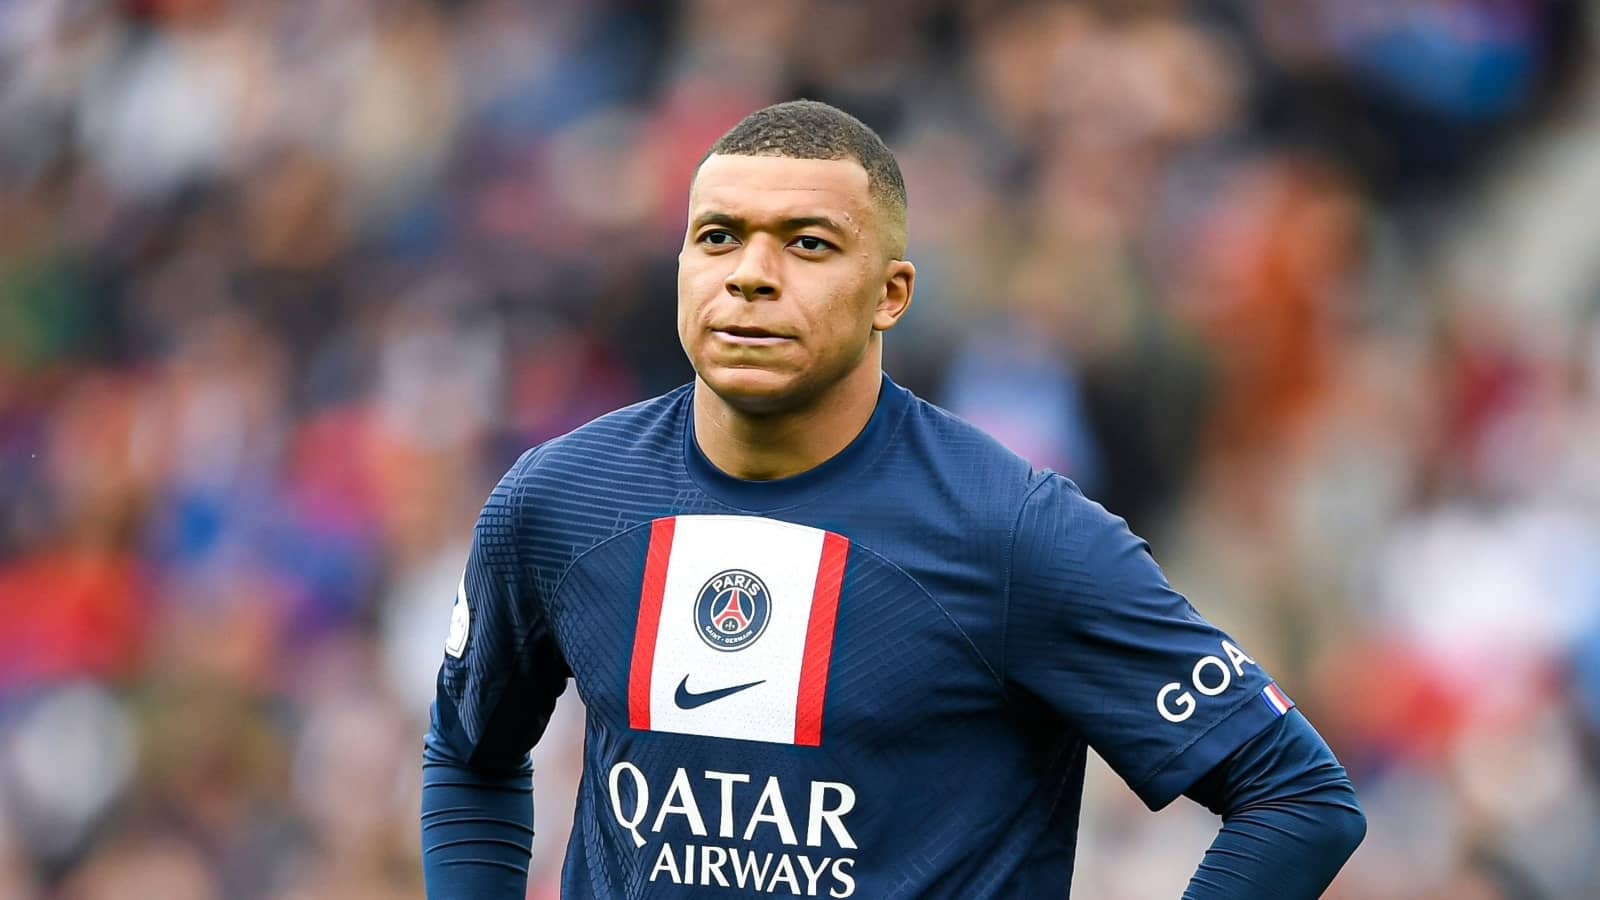 I NEVER DISCUSSED ANY CONTRACT RENEWAL WITH PSG- KYLIAN MBAPPE